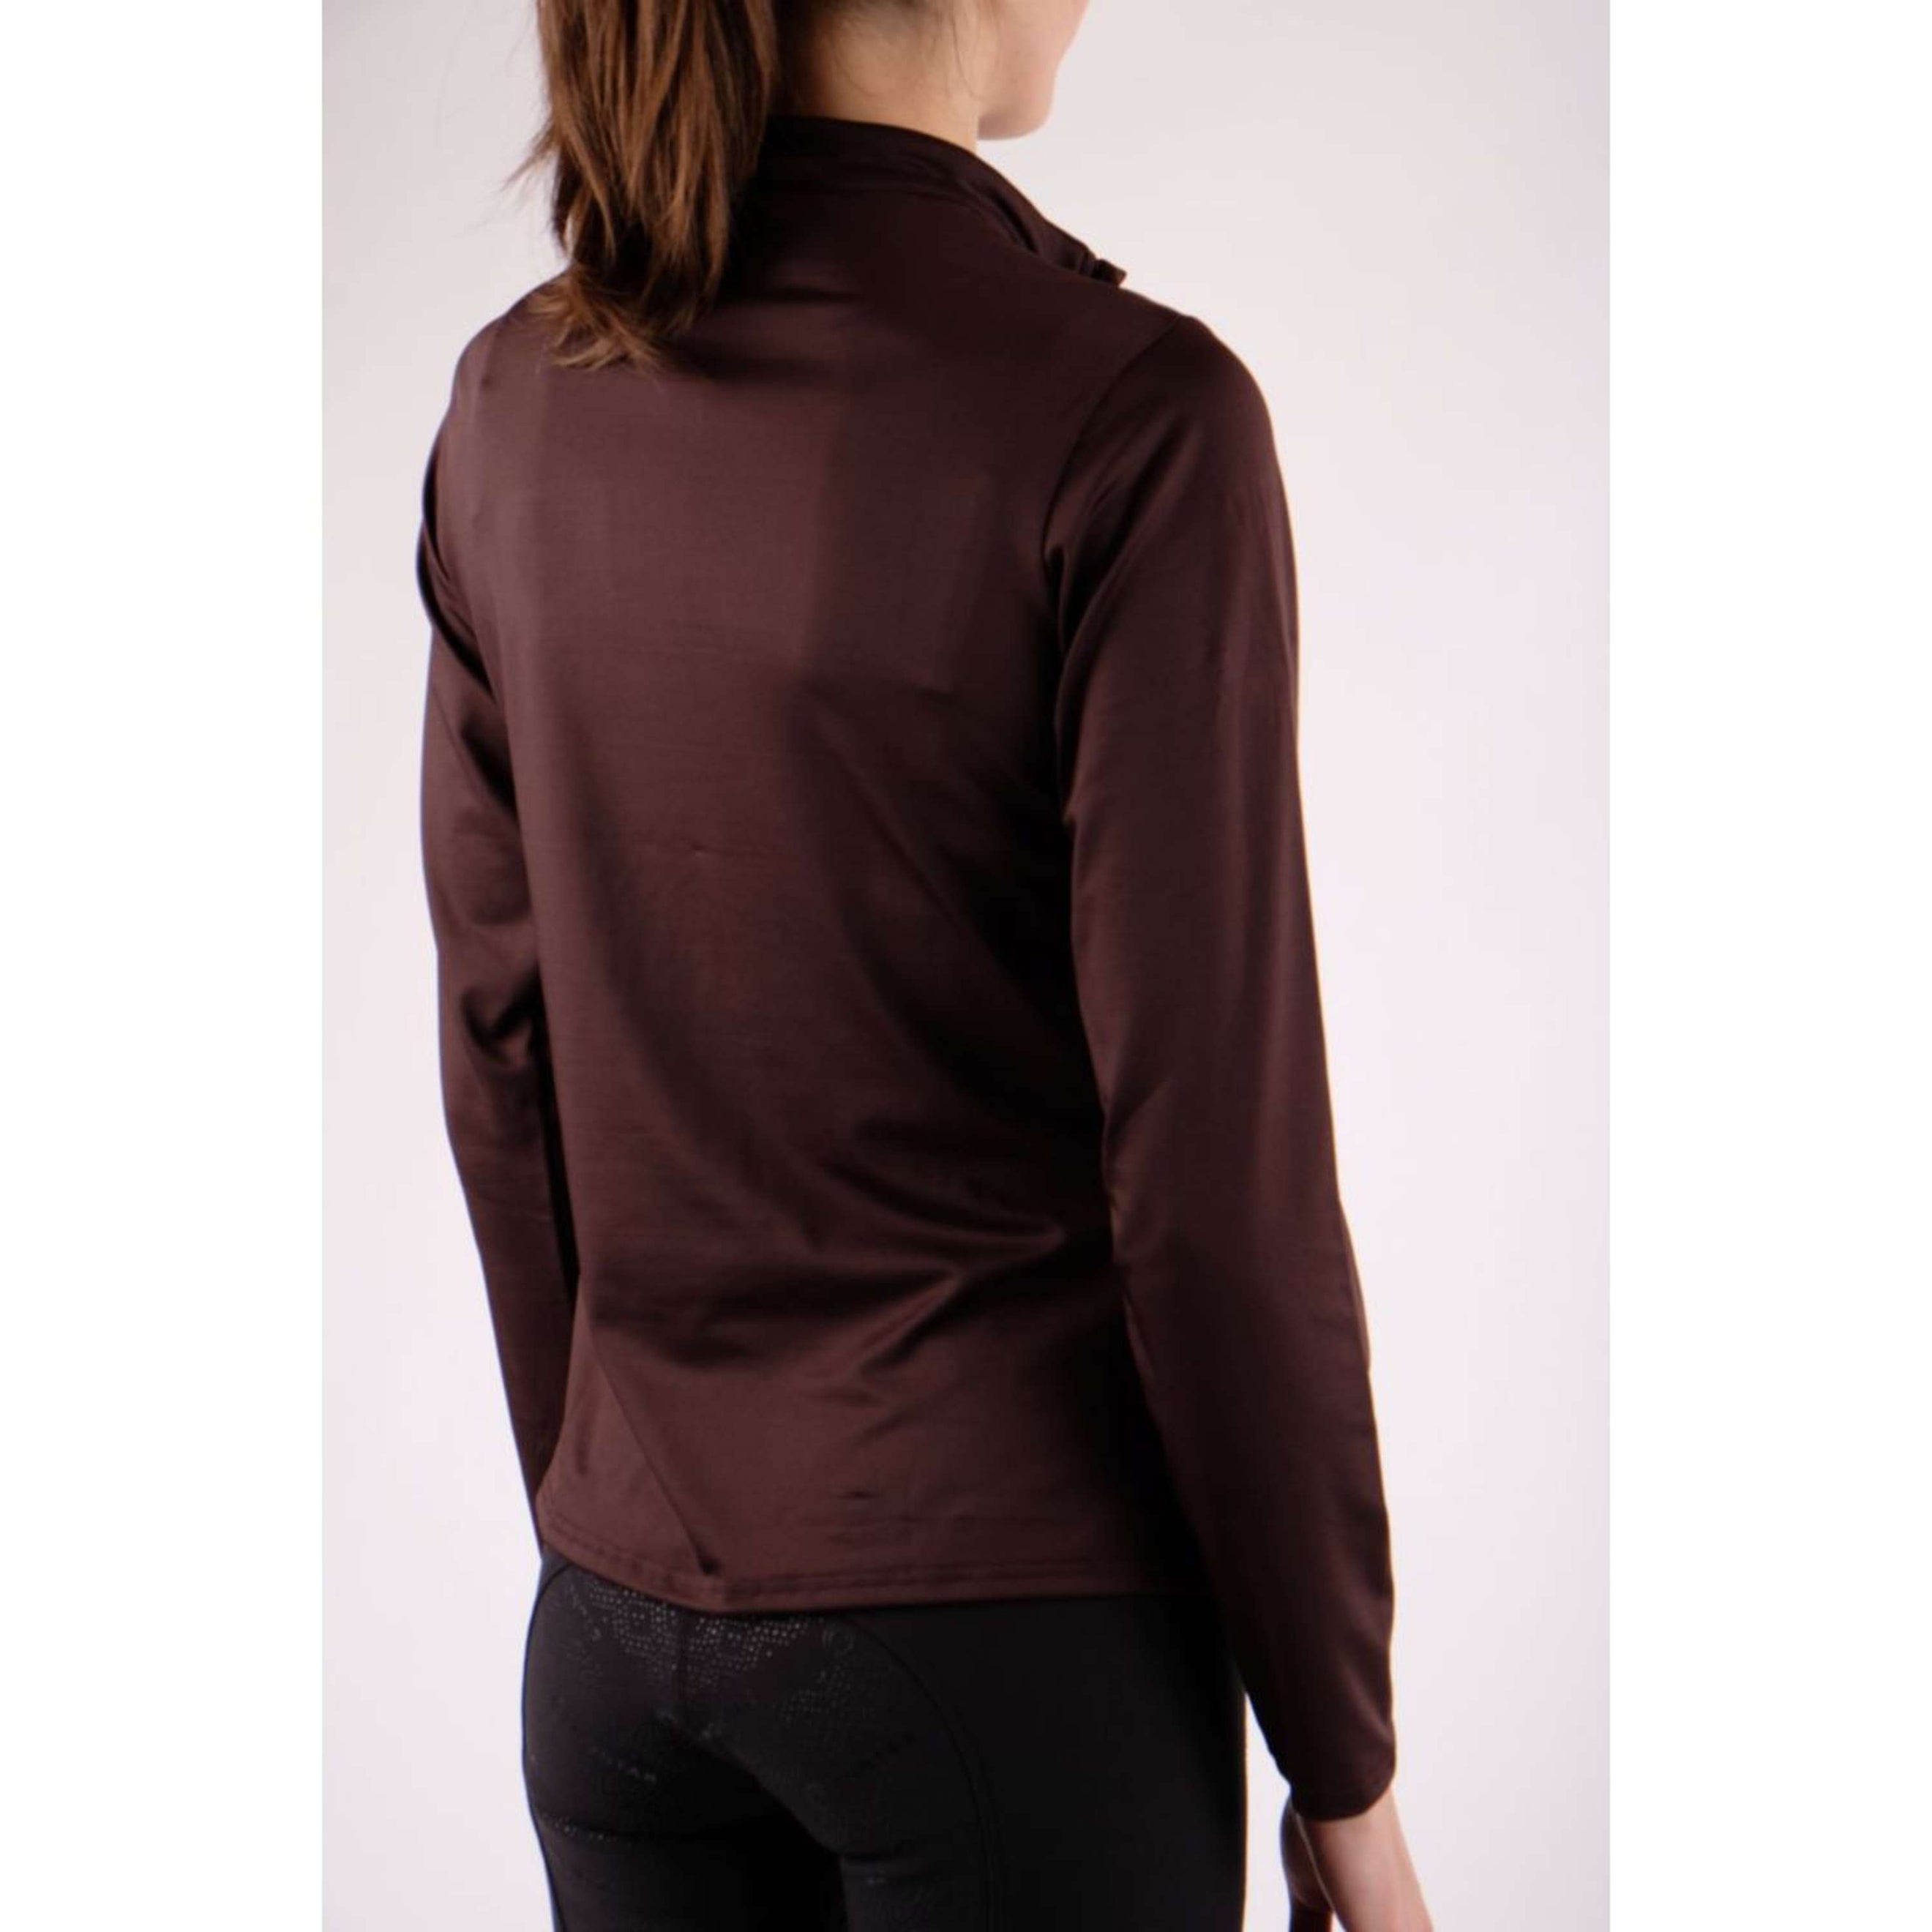 Montar Chemise Everly Rosegold Longues Manches Marron